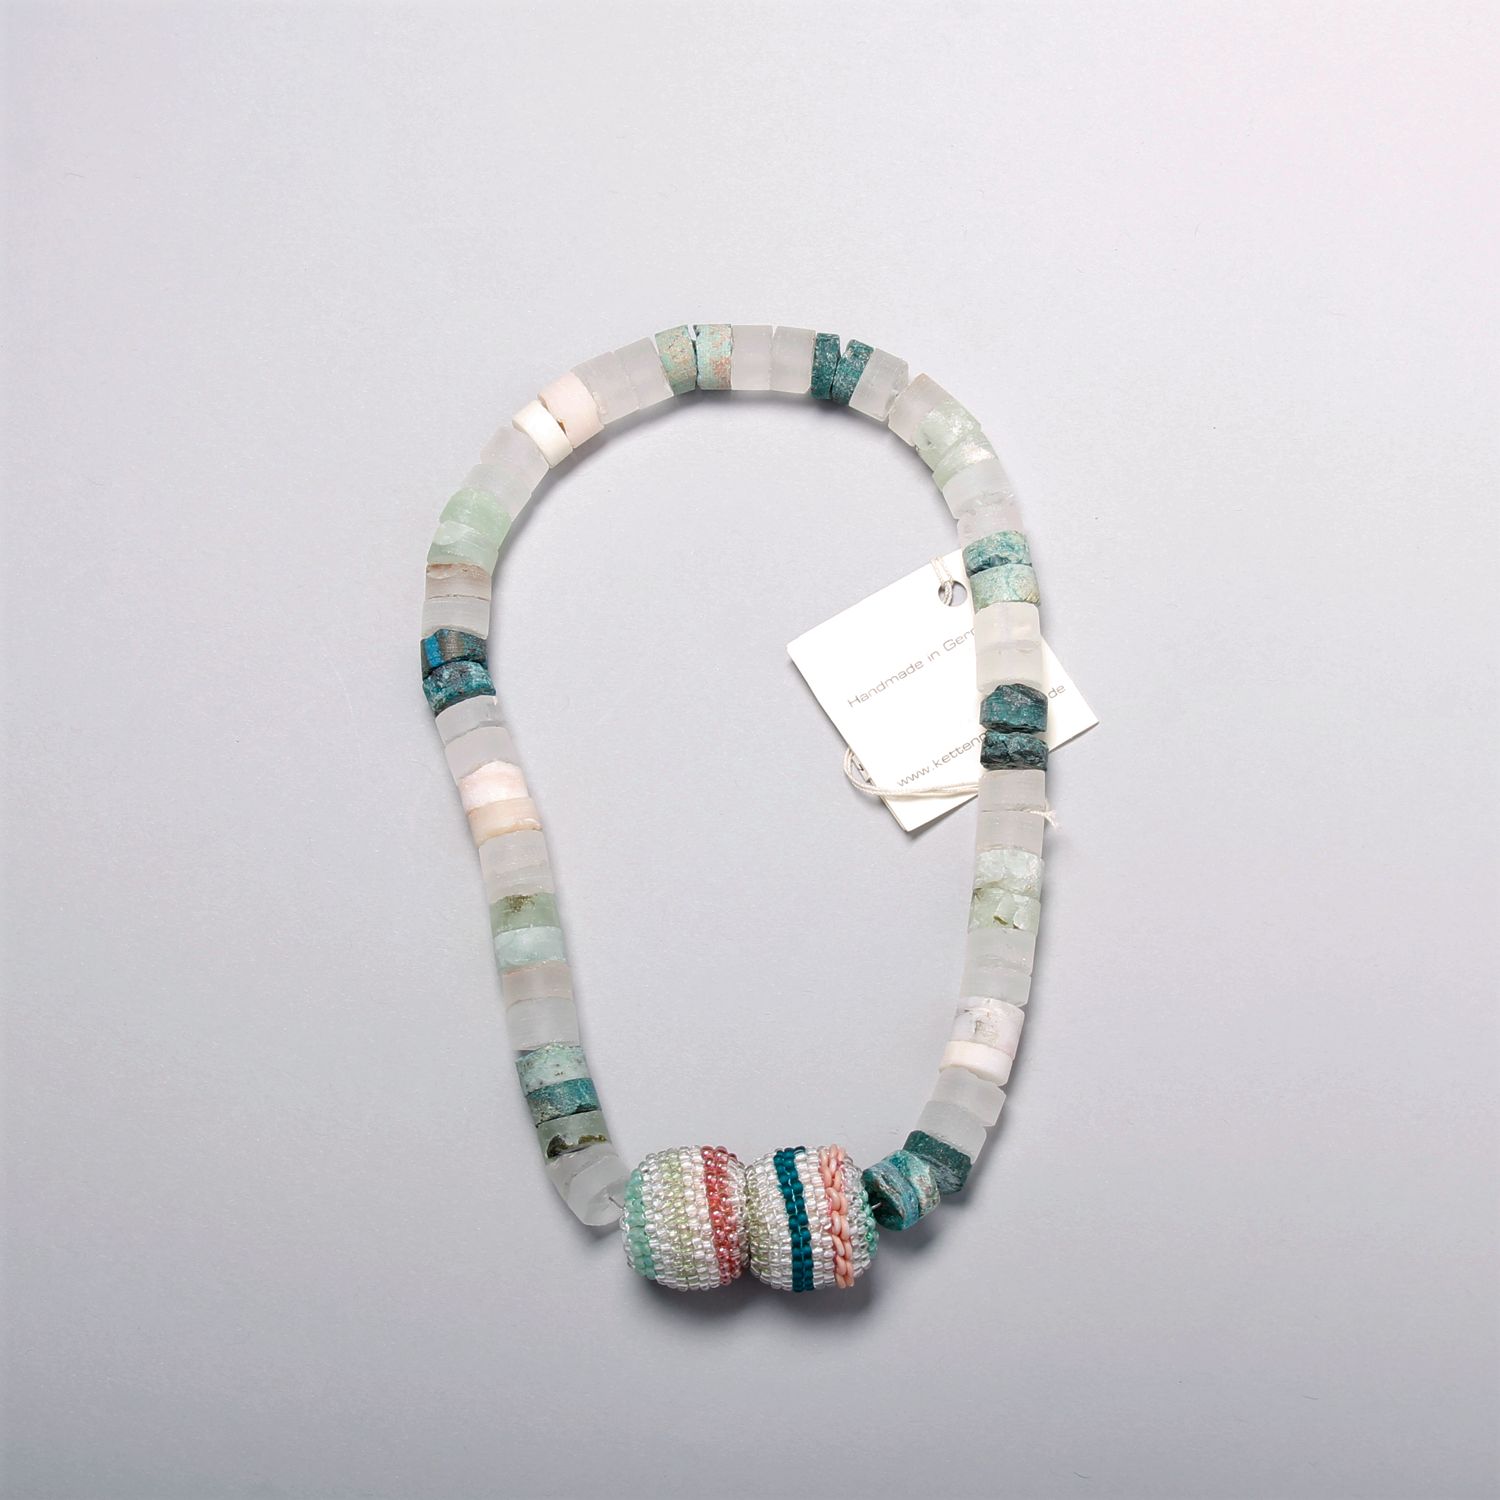 Monica Nesseler: Necklace Product Image 1 of 4